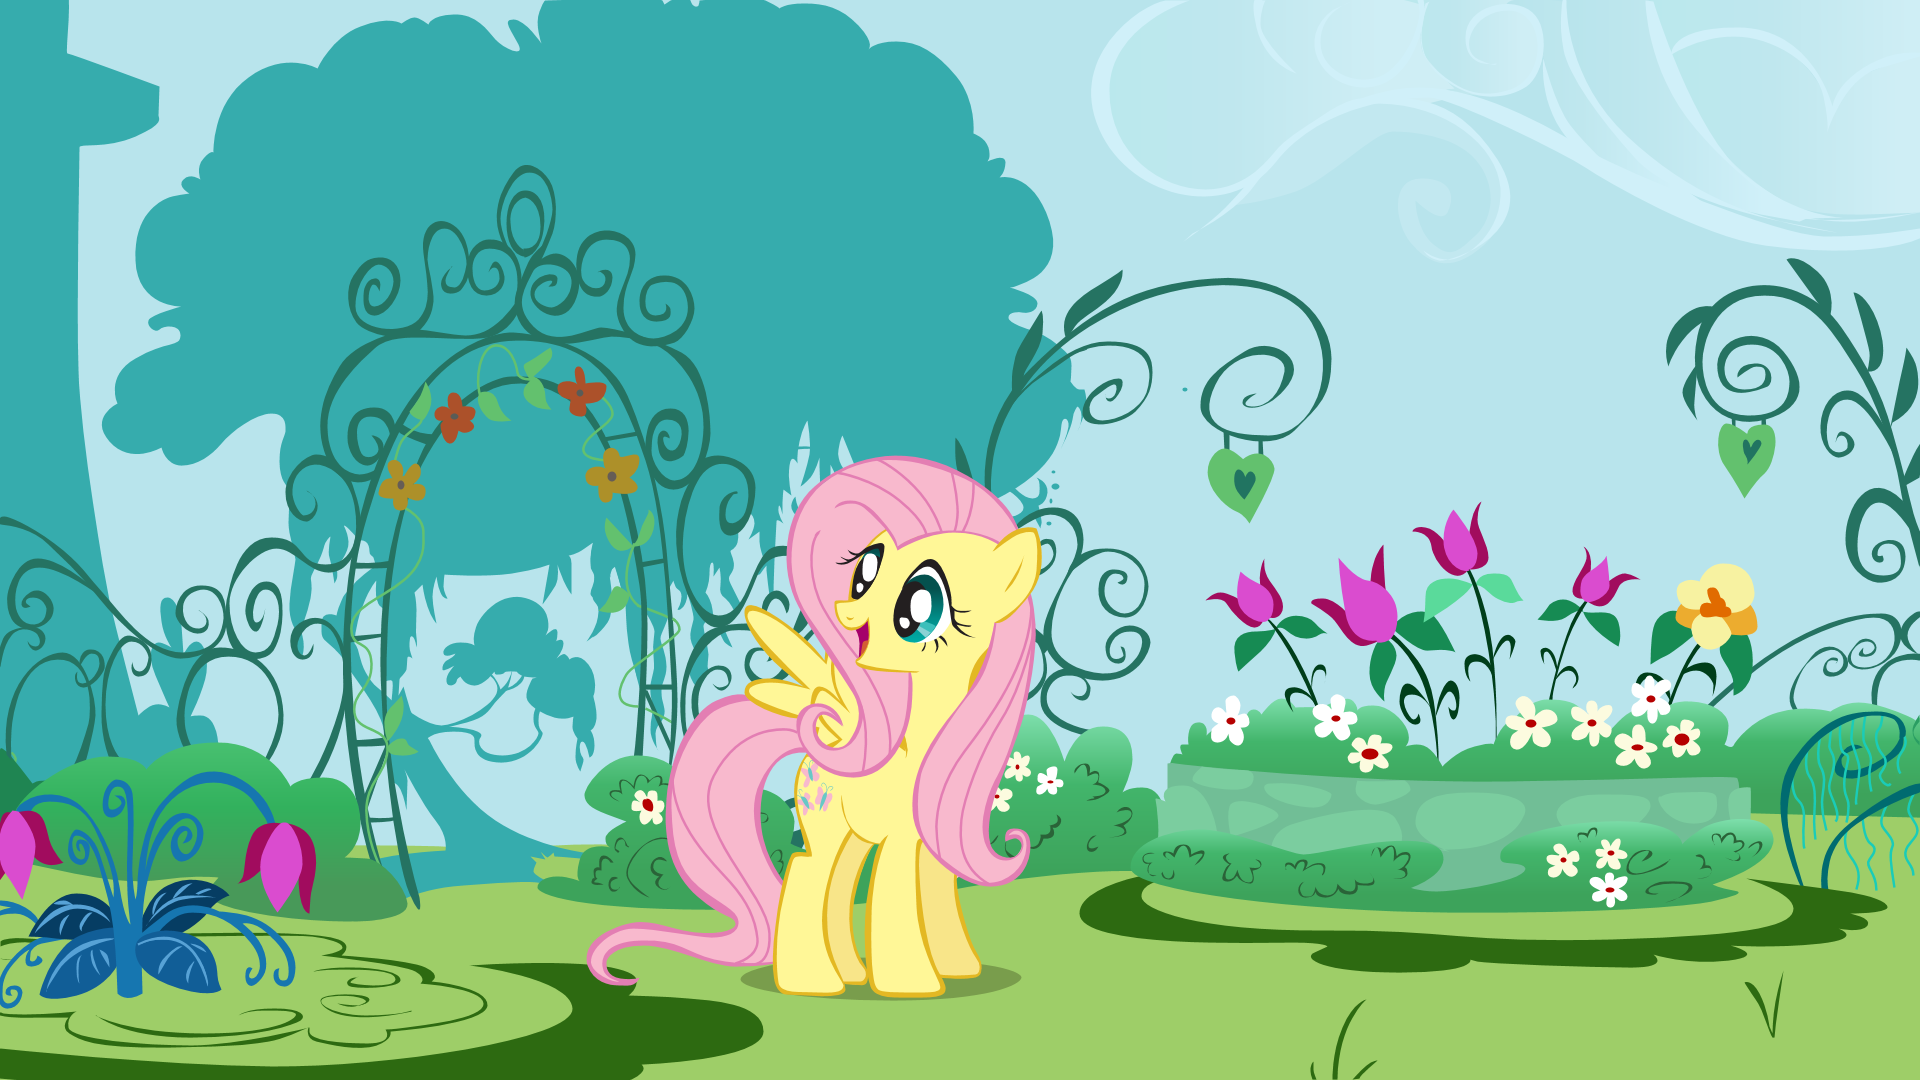 The Private Gated Garden by ShelltoonTV